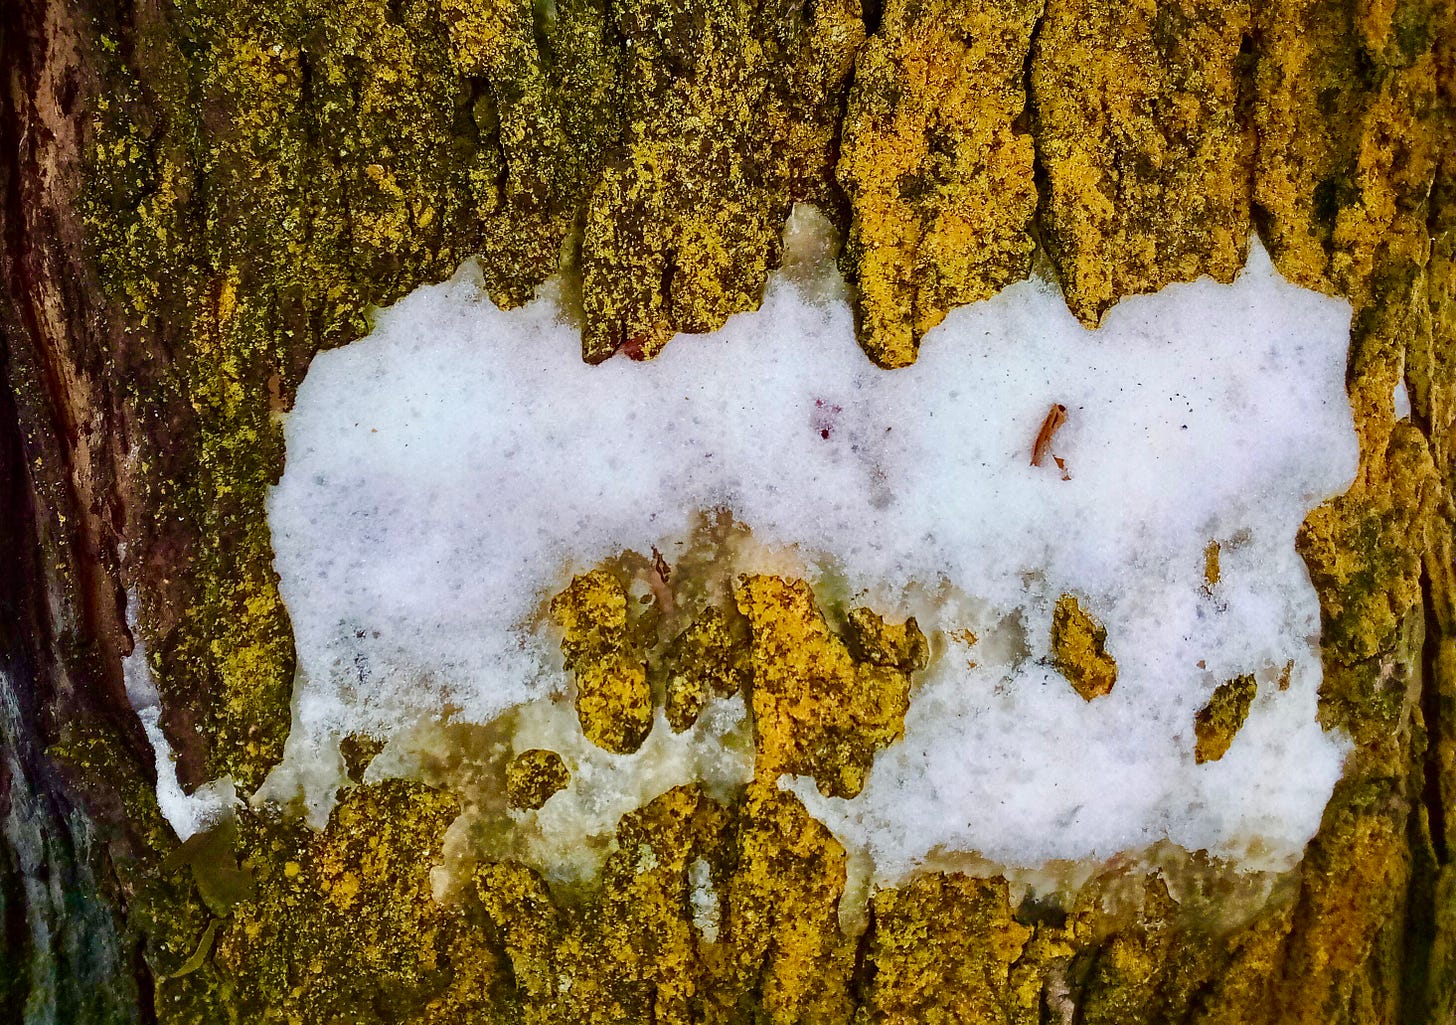 Patch of snow on a mossy tree trunk